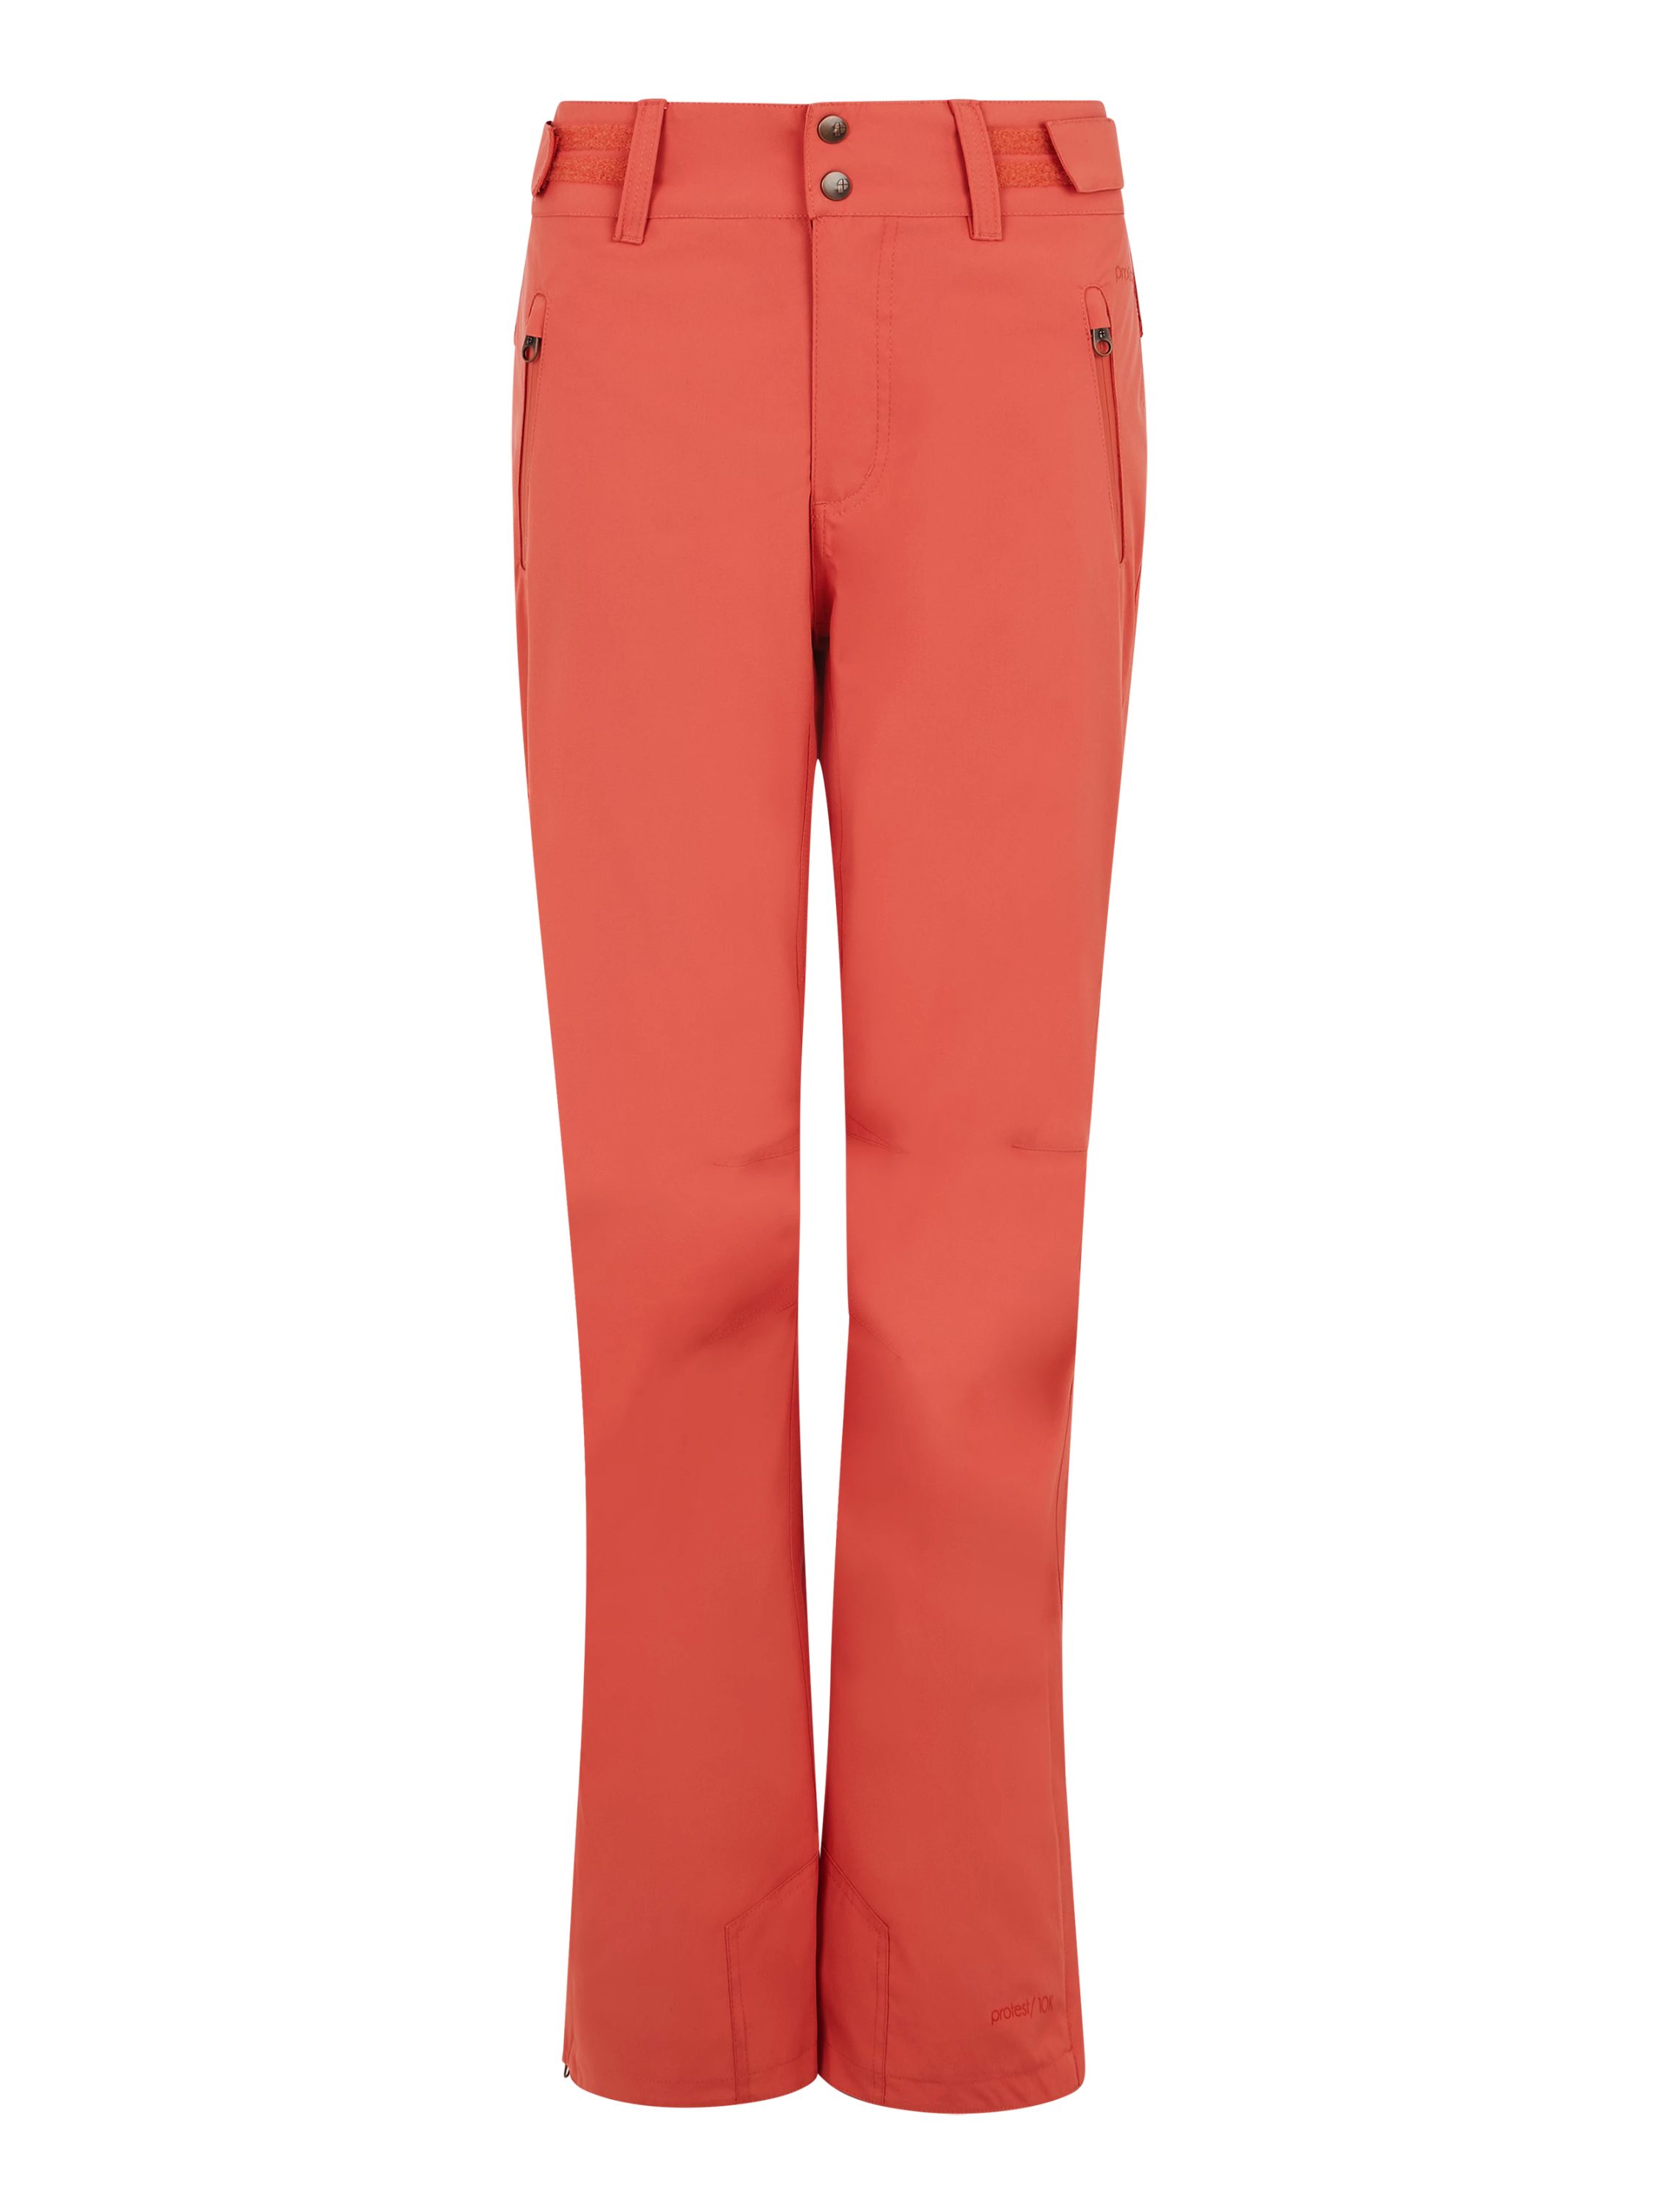 Protest Skihose CINNAMON Red Tosca snowpants